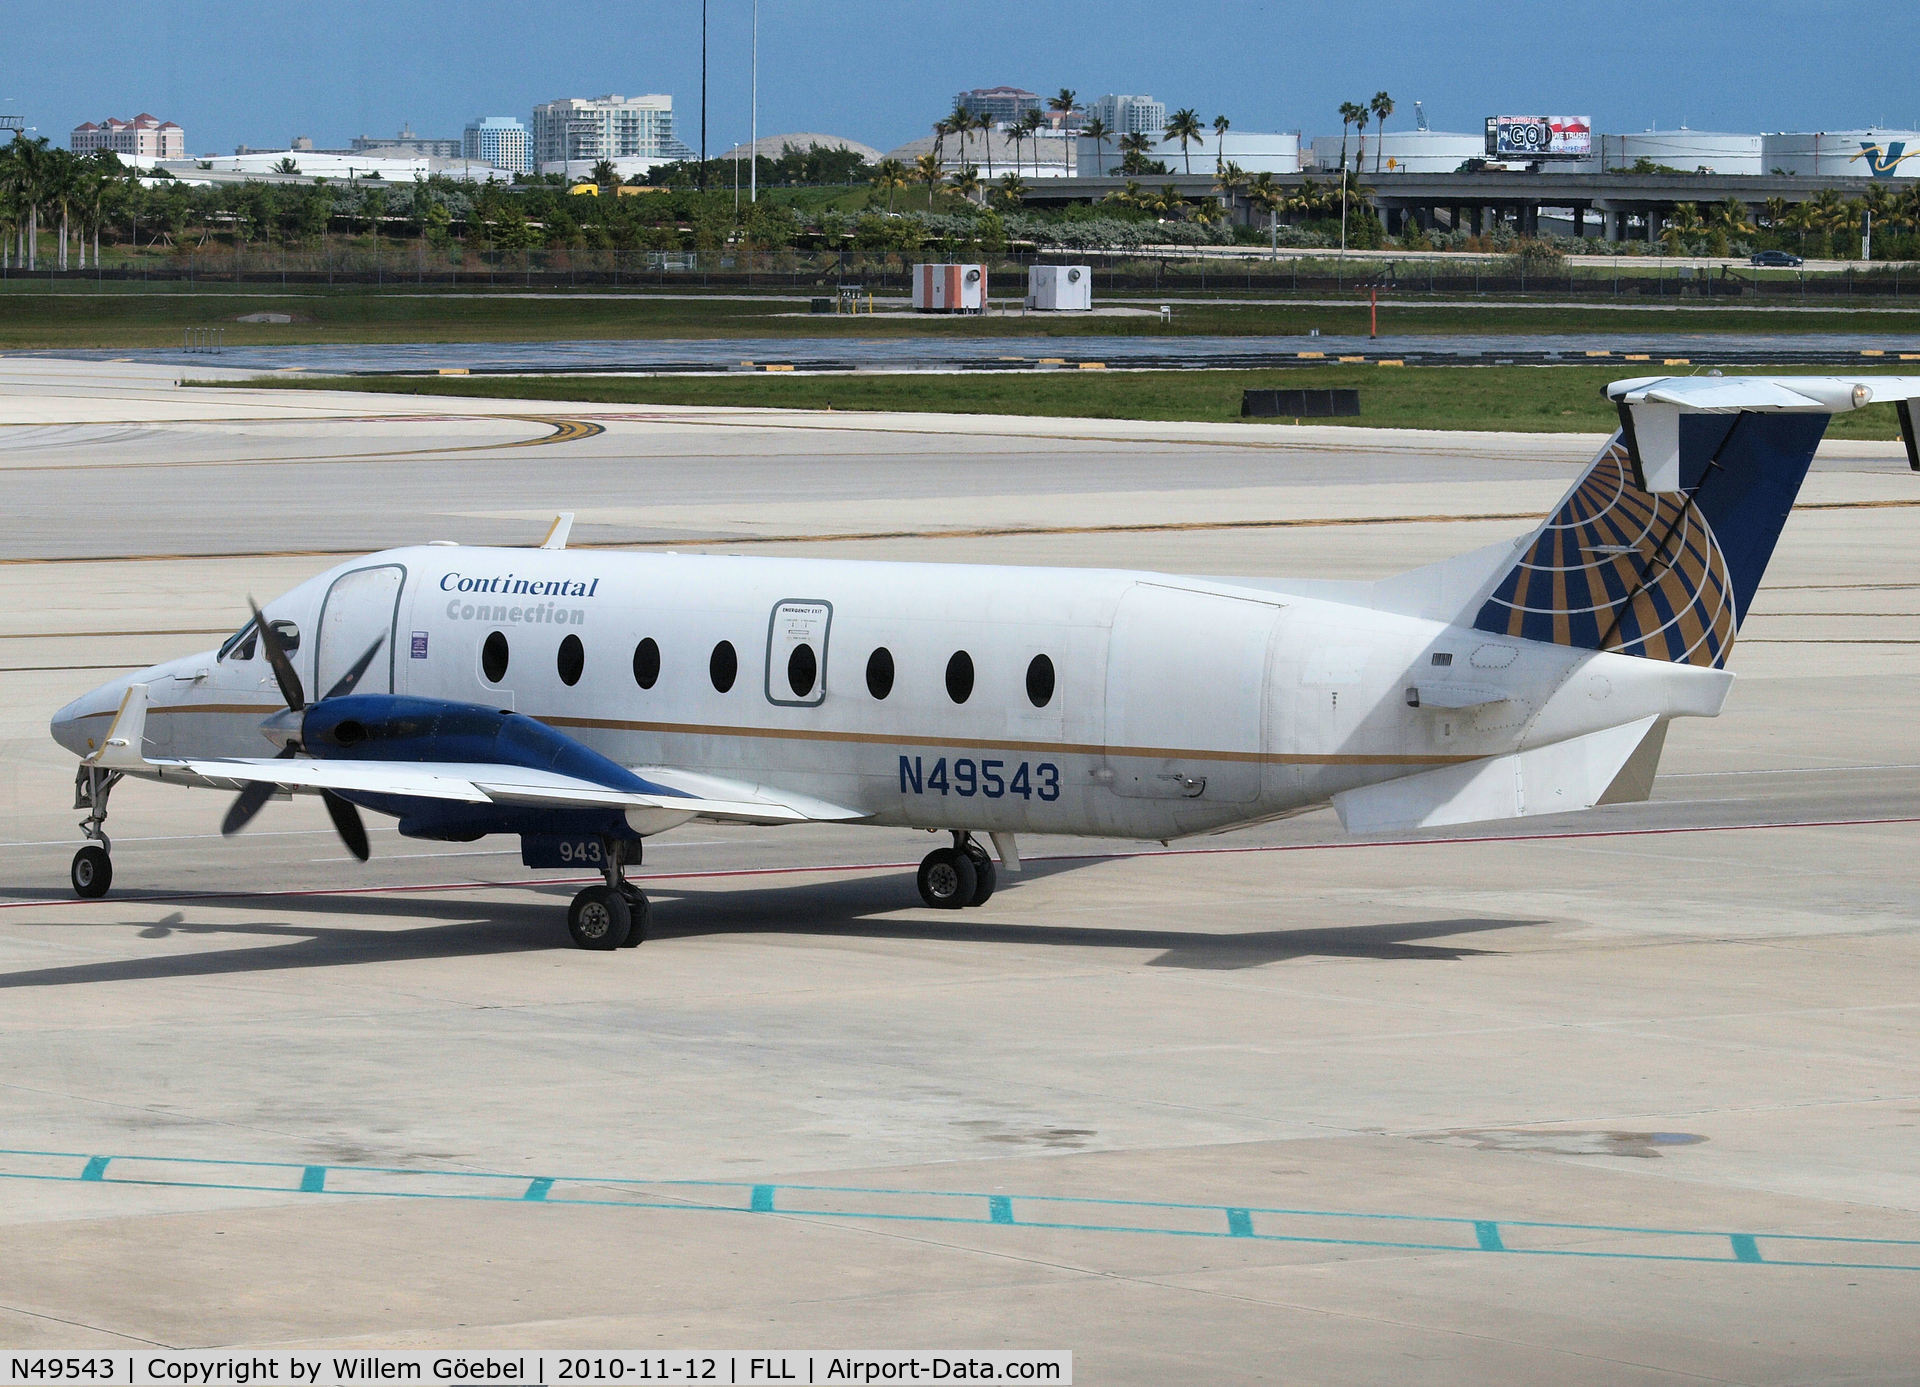 N49543, 1995 Beech 1900D C/N UE-181, Taxi to the runway of FLL Airport